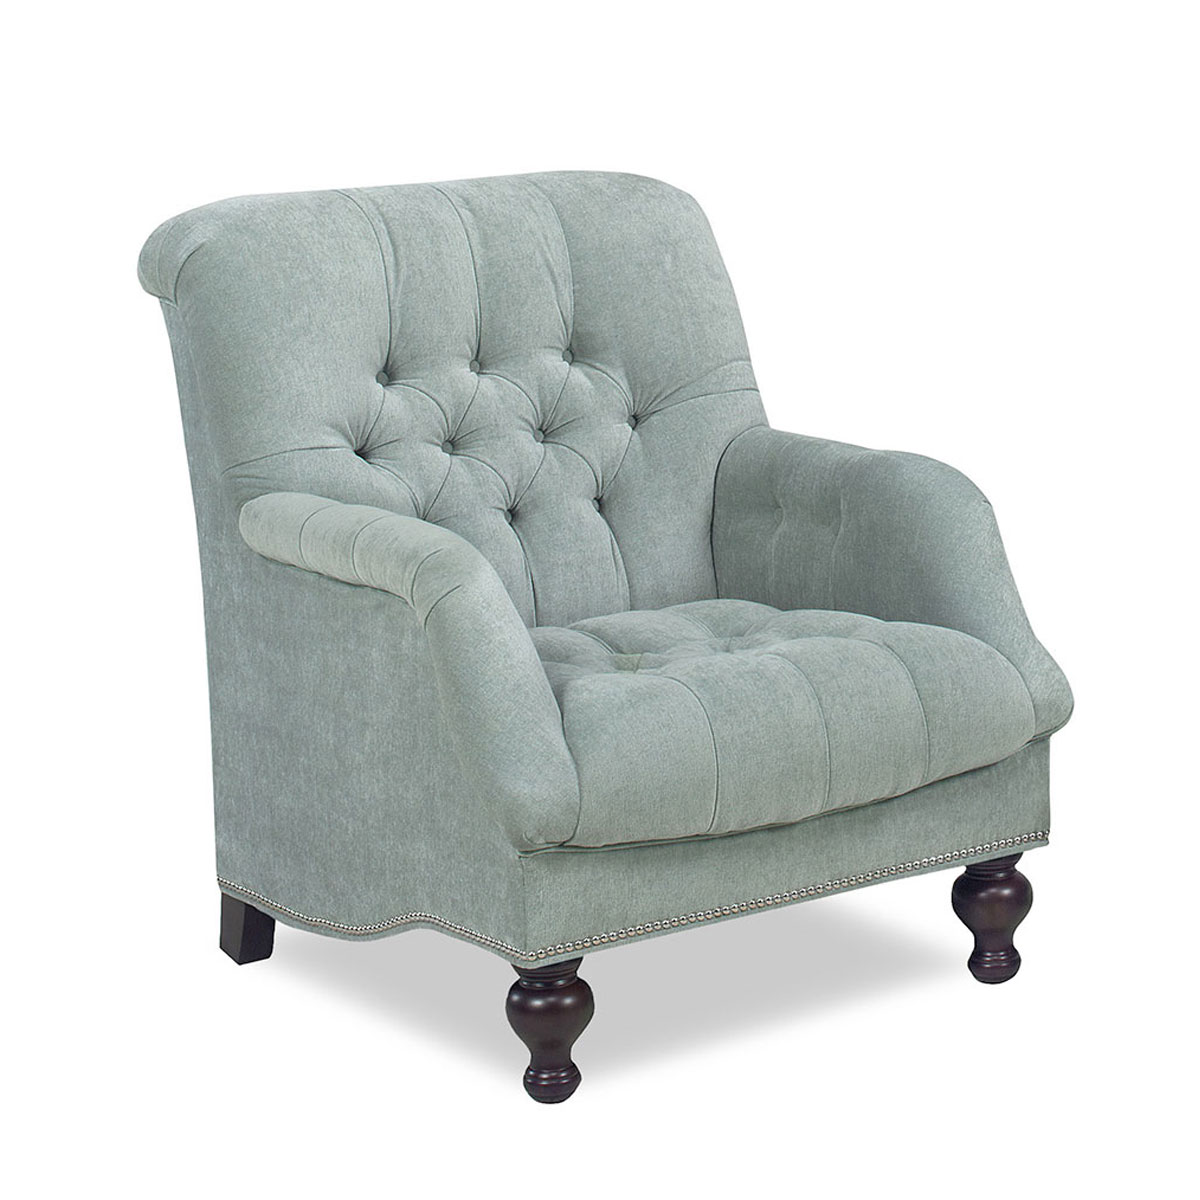 Temple Furniture 28825 Nelle Lounge Chair